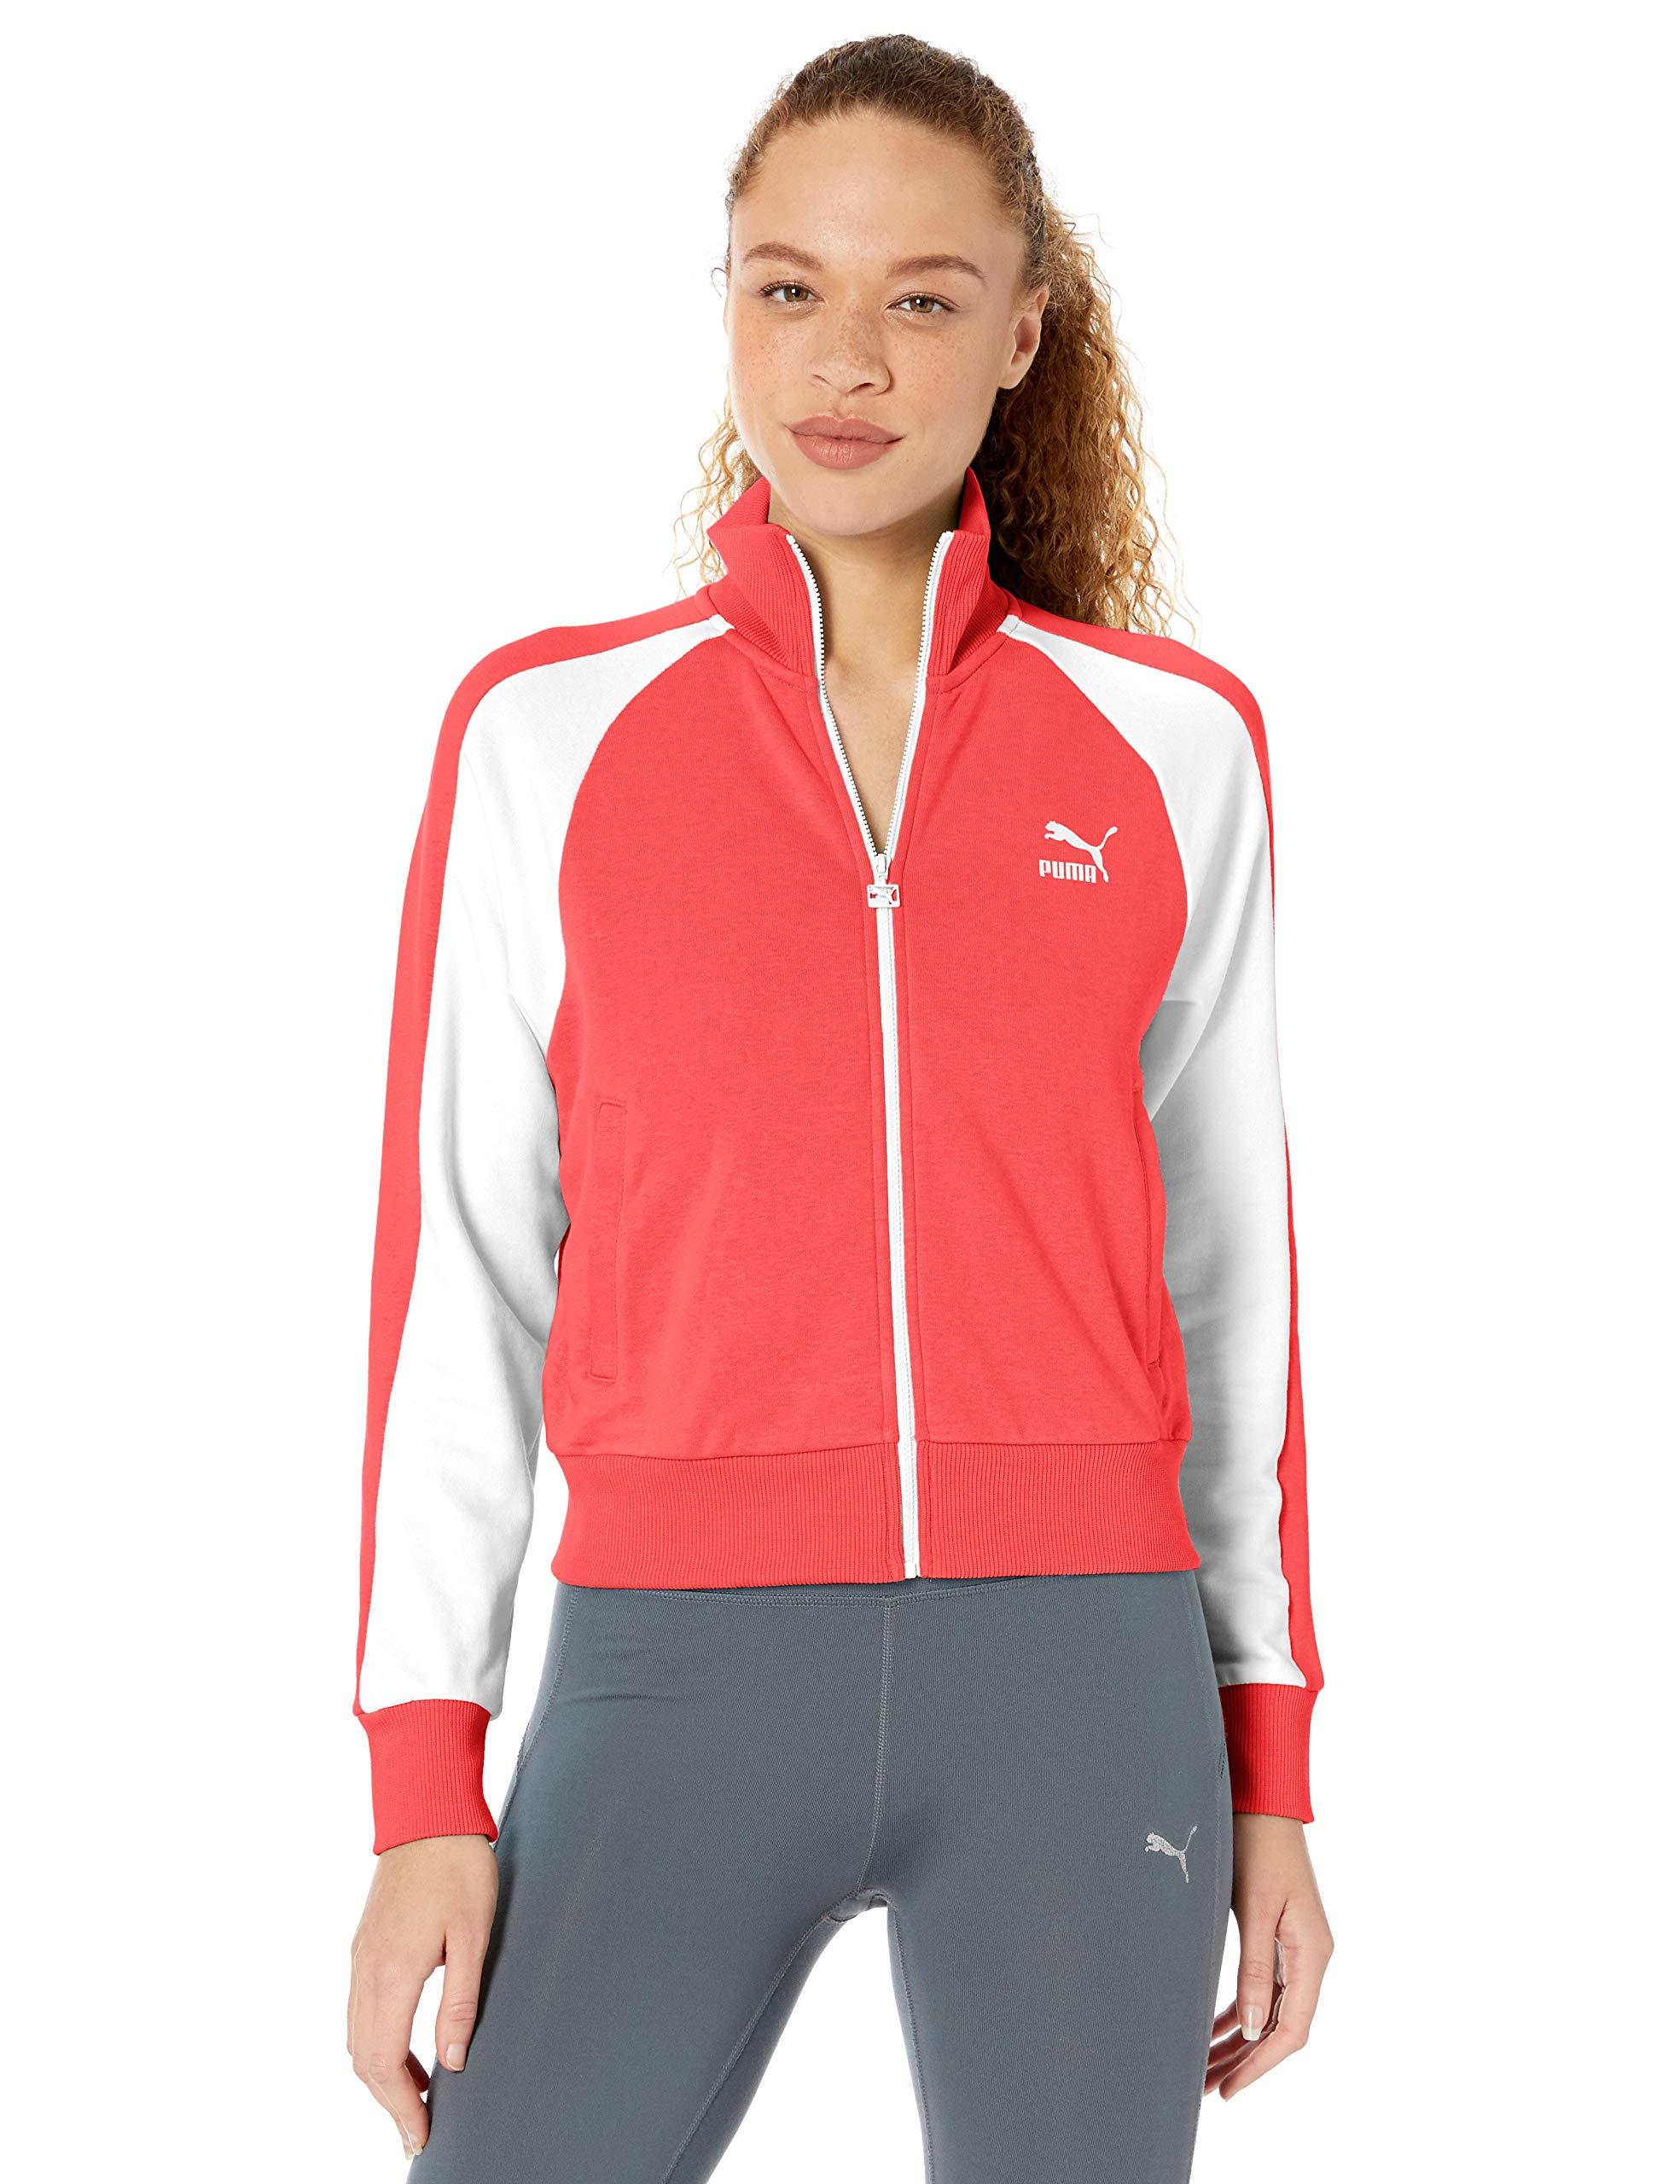 PUMA Rubber Classics T7 Track Jacket in Red - Lyst